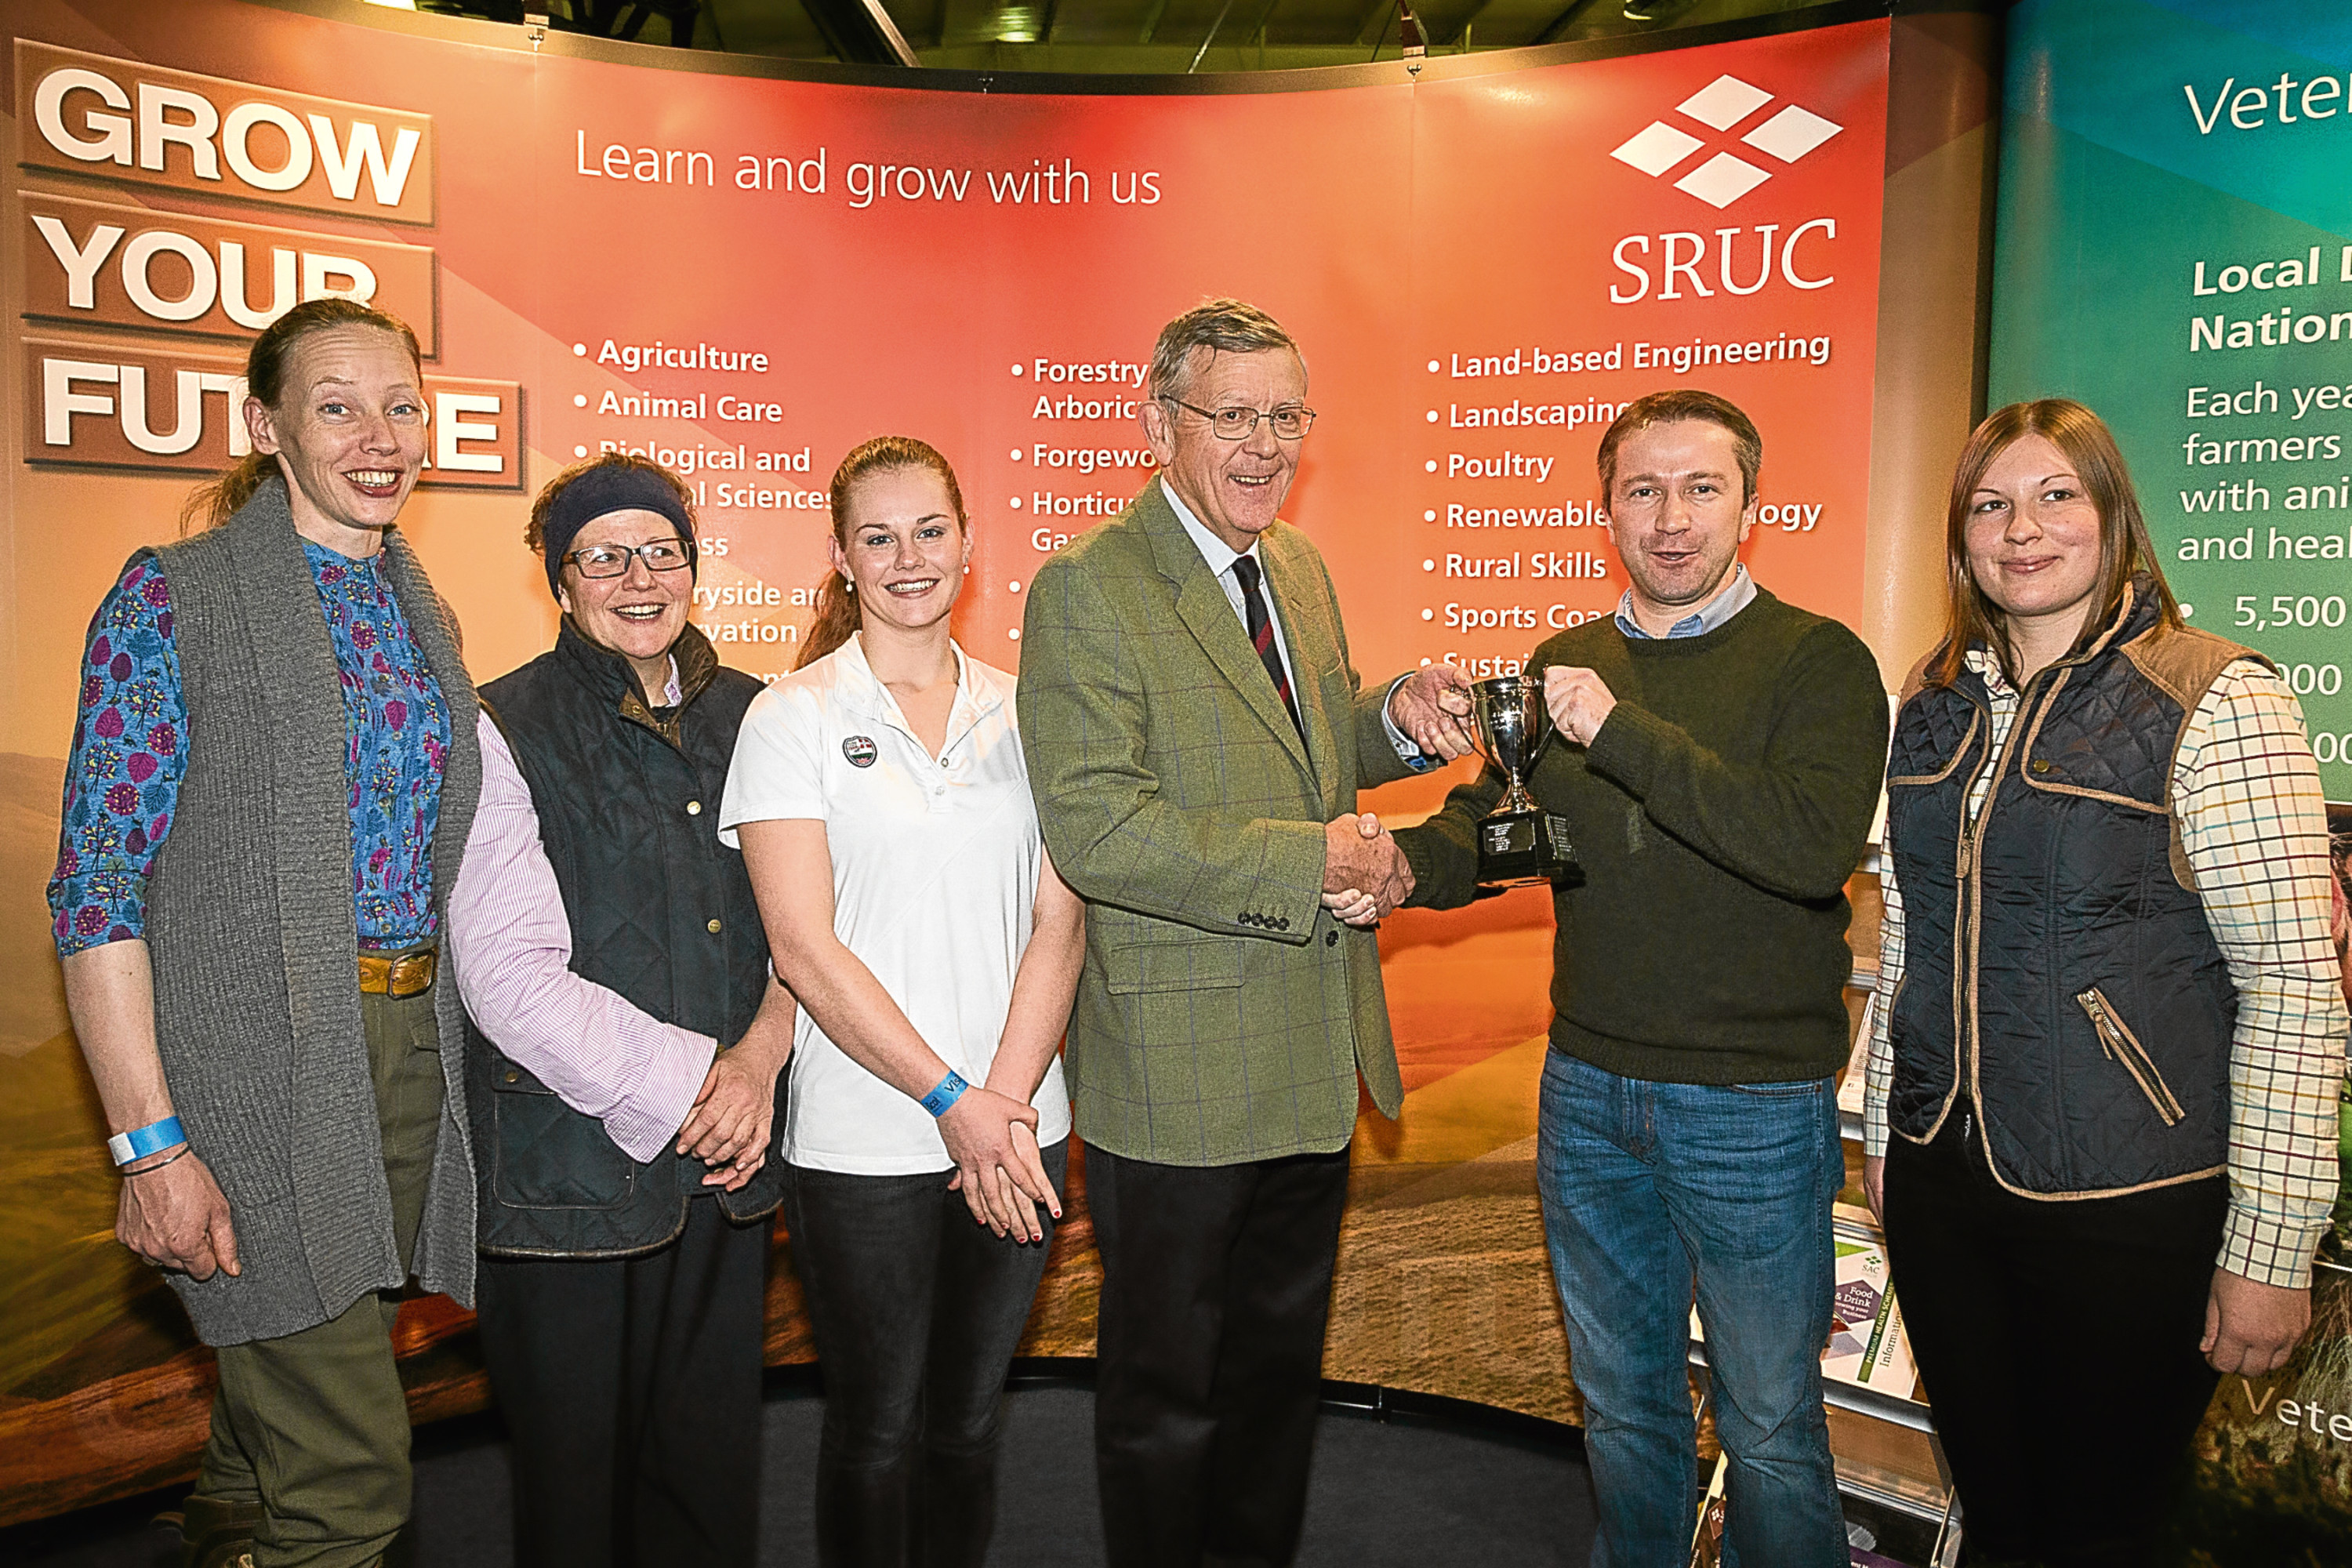 John Rhind, a Trustee of Mains of Loirston Trust, presents the 2017 Winter Wheat Challenge trophy to SRUC students, (left to right): Joanne Breese, Helen Parker, Emma Parvin, Timur Kharisov (team captain) and Heather Duff at AgriScot. The students are based at SRUC’s Aberdeen campus.